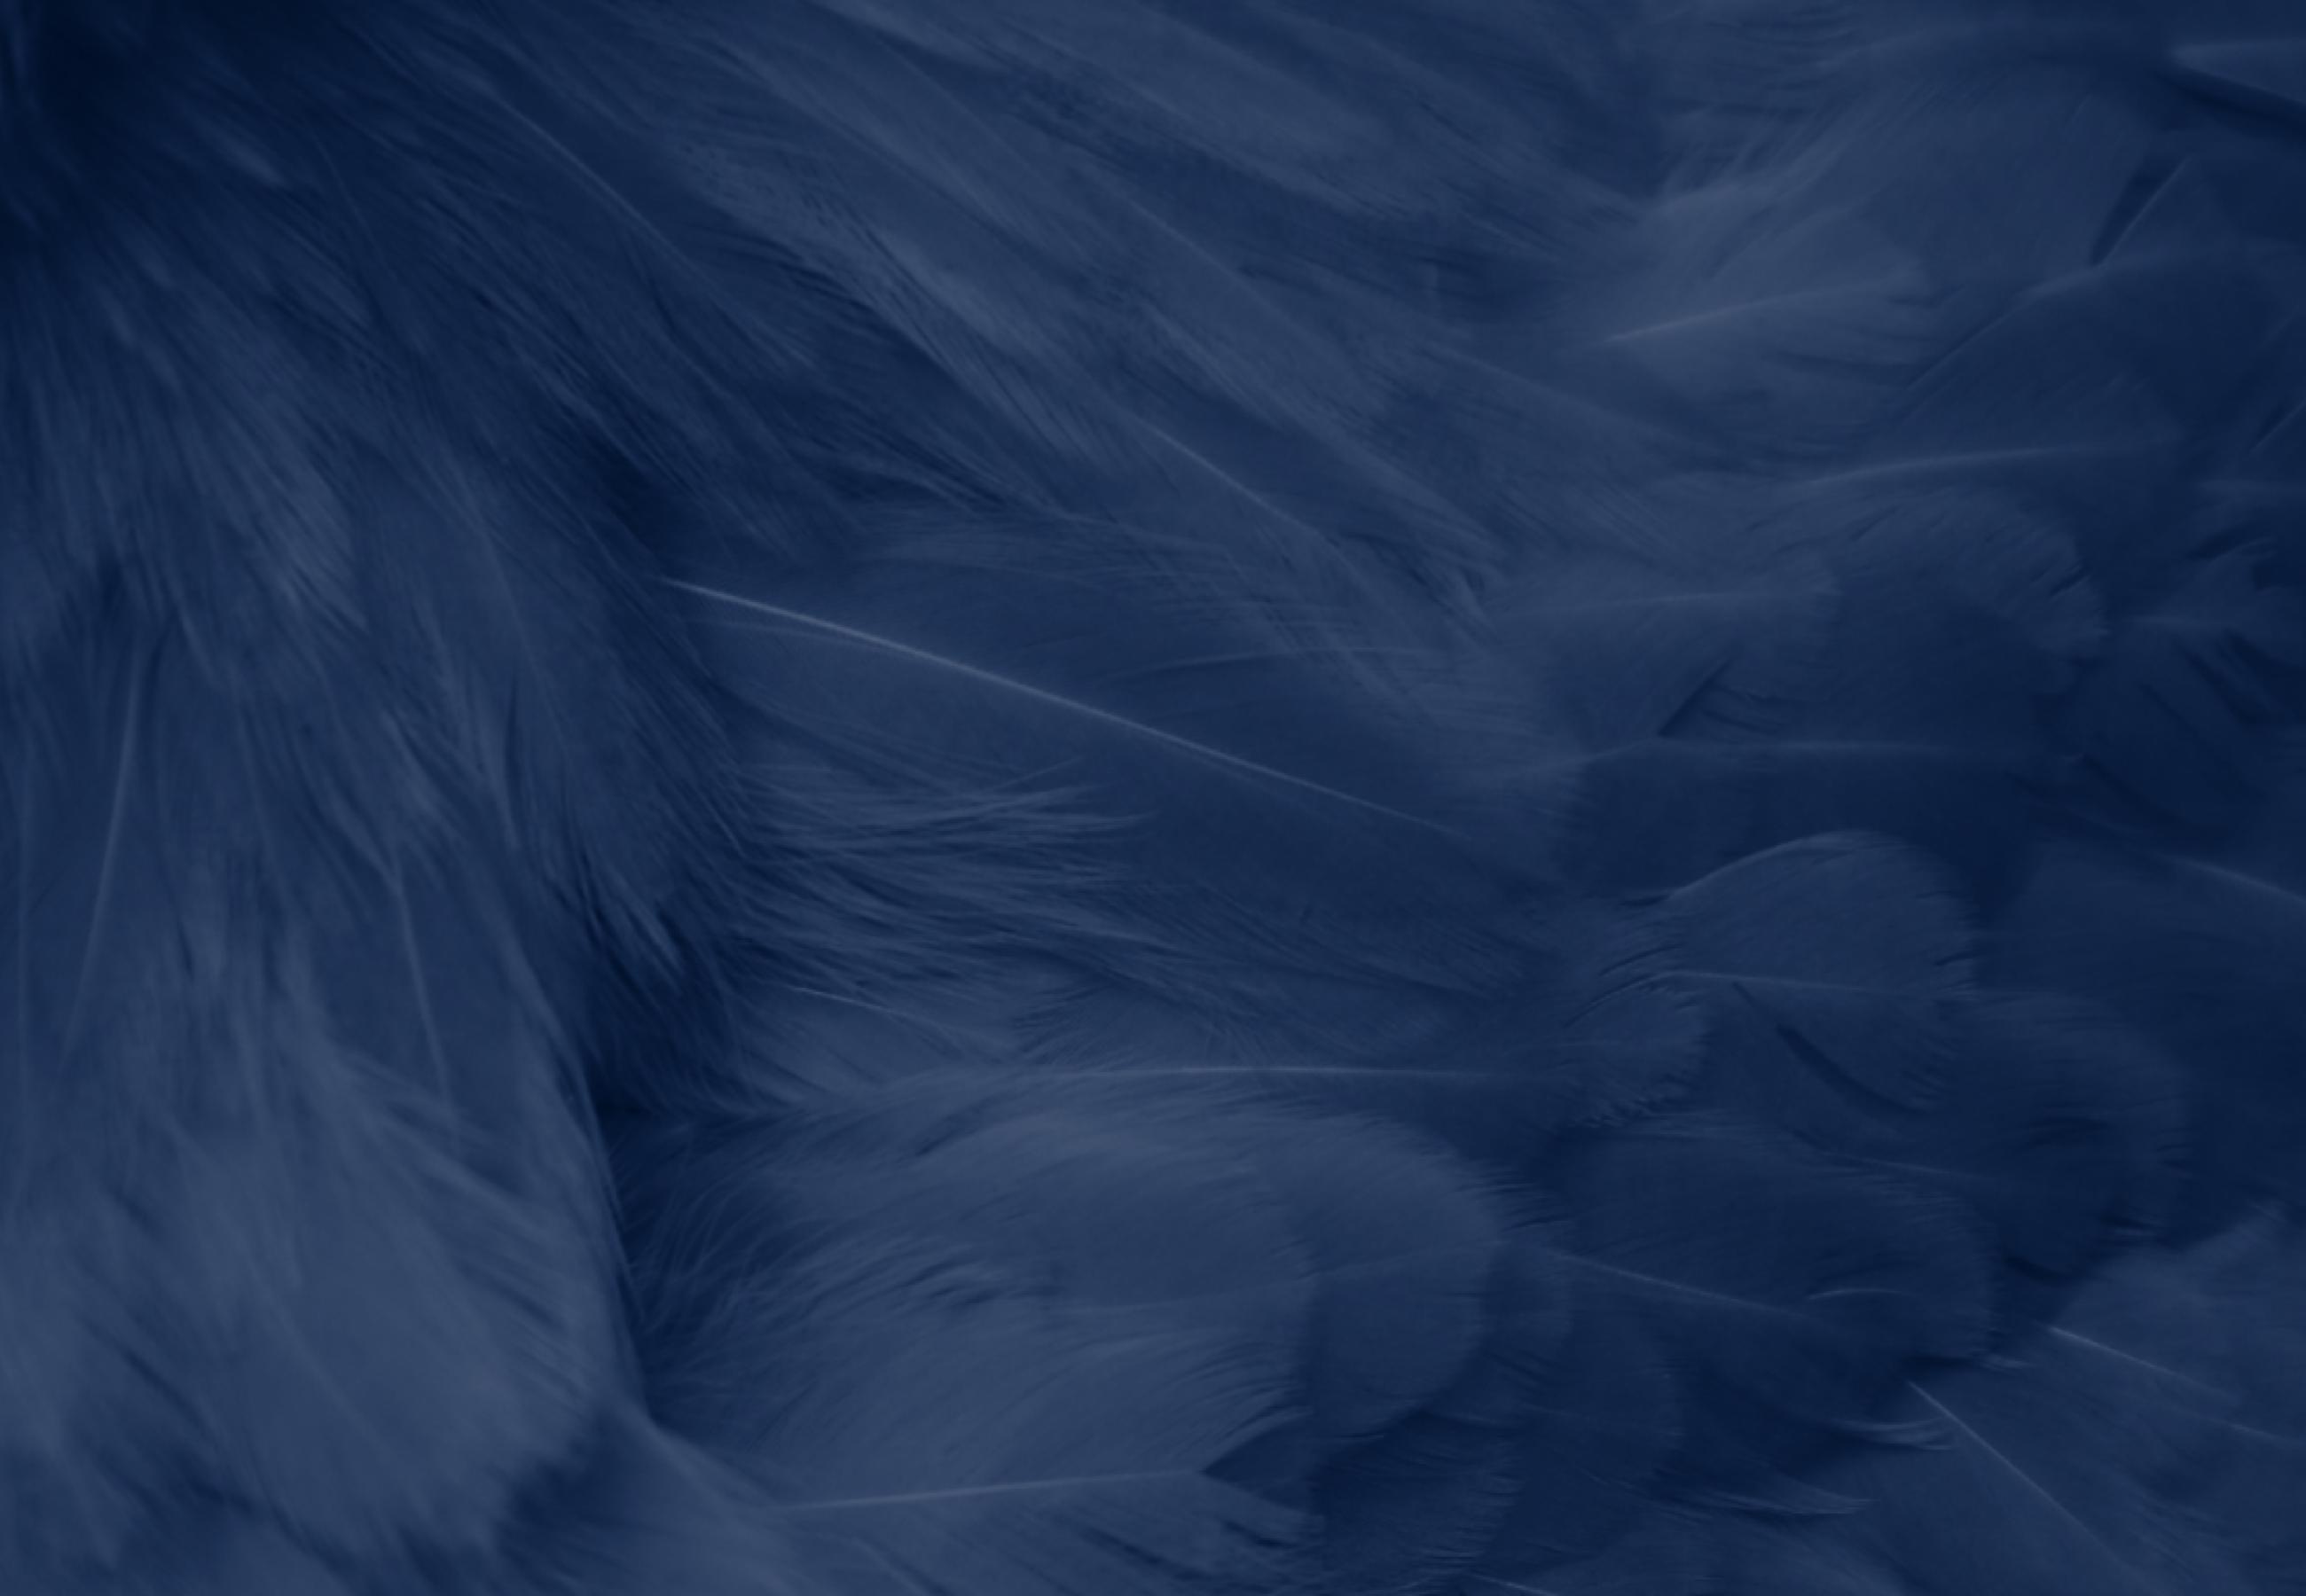 Feathers background 